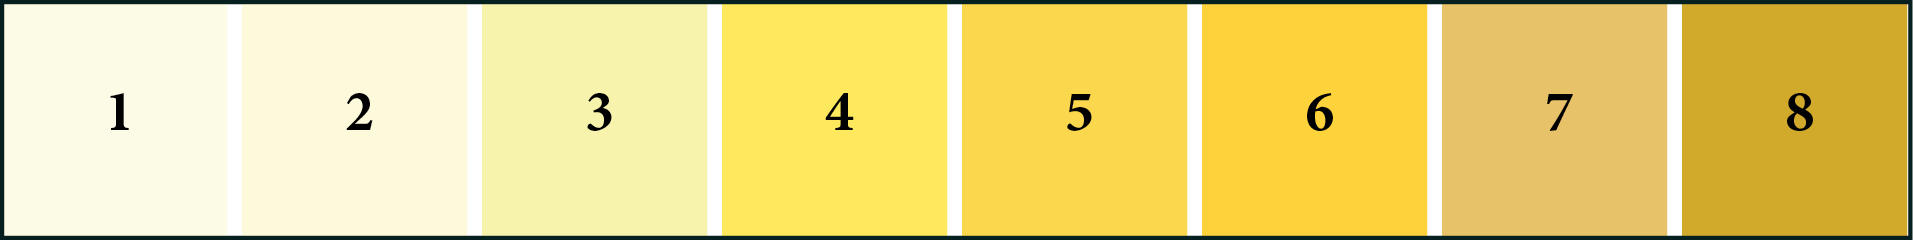 Diagram with 8 colored squares numbered, left to right, 1 through 8, increasing in color from pale yellow to dark brownish yellow.